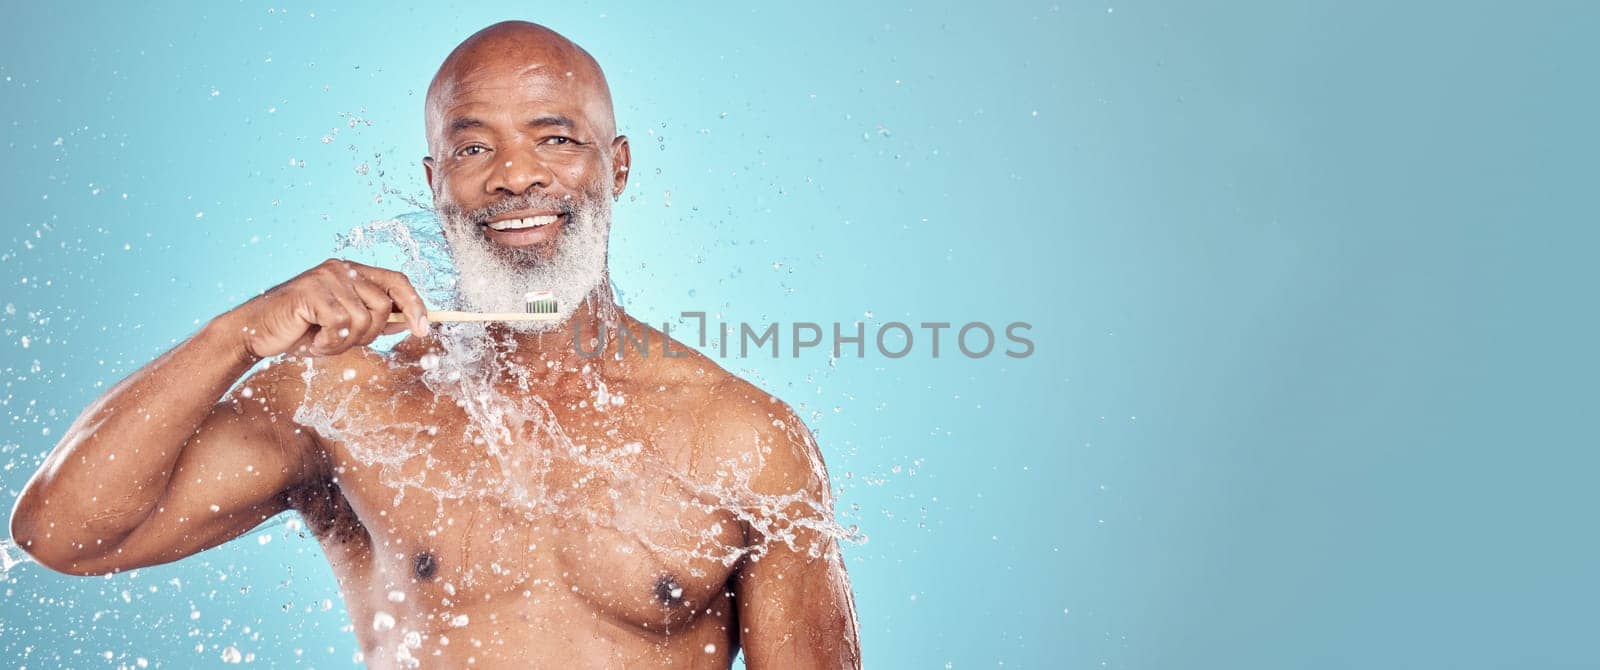 Water splash, dental and black man with toothbrush, mockup and smile on face isolated on blue background space. Teeth, toothpaste and product placement, happy senior in studio portrait cleaning mouth.